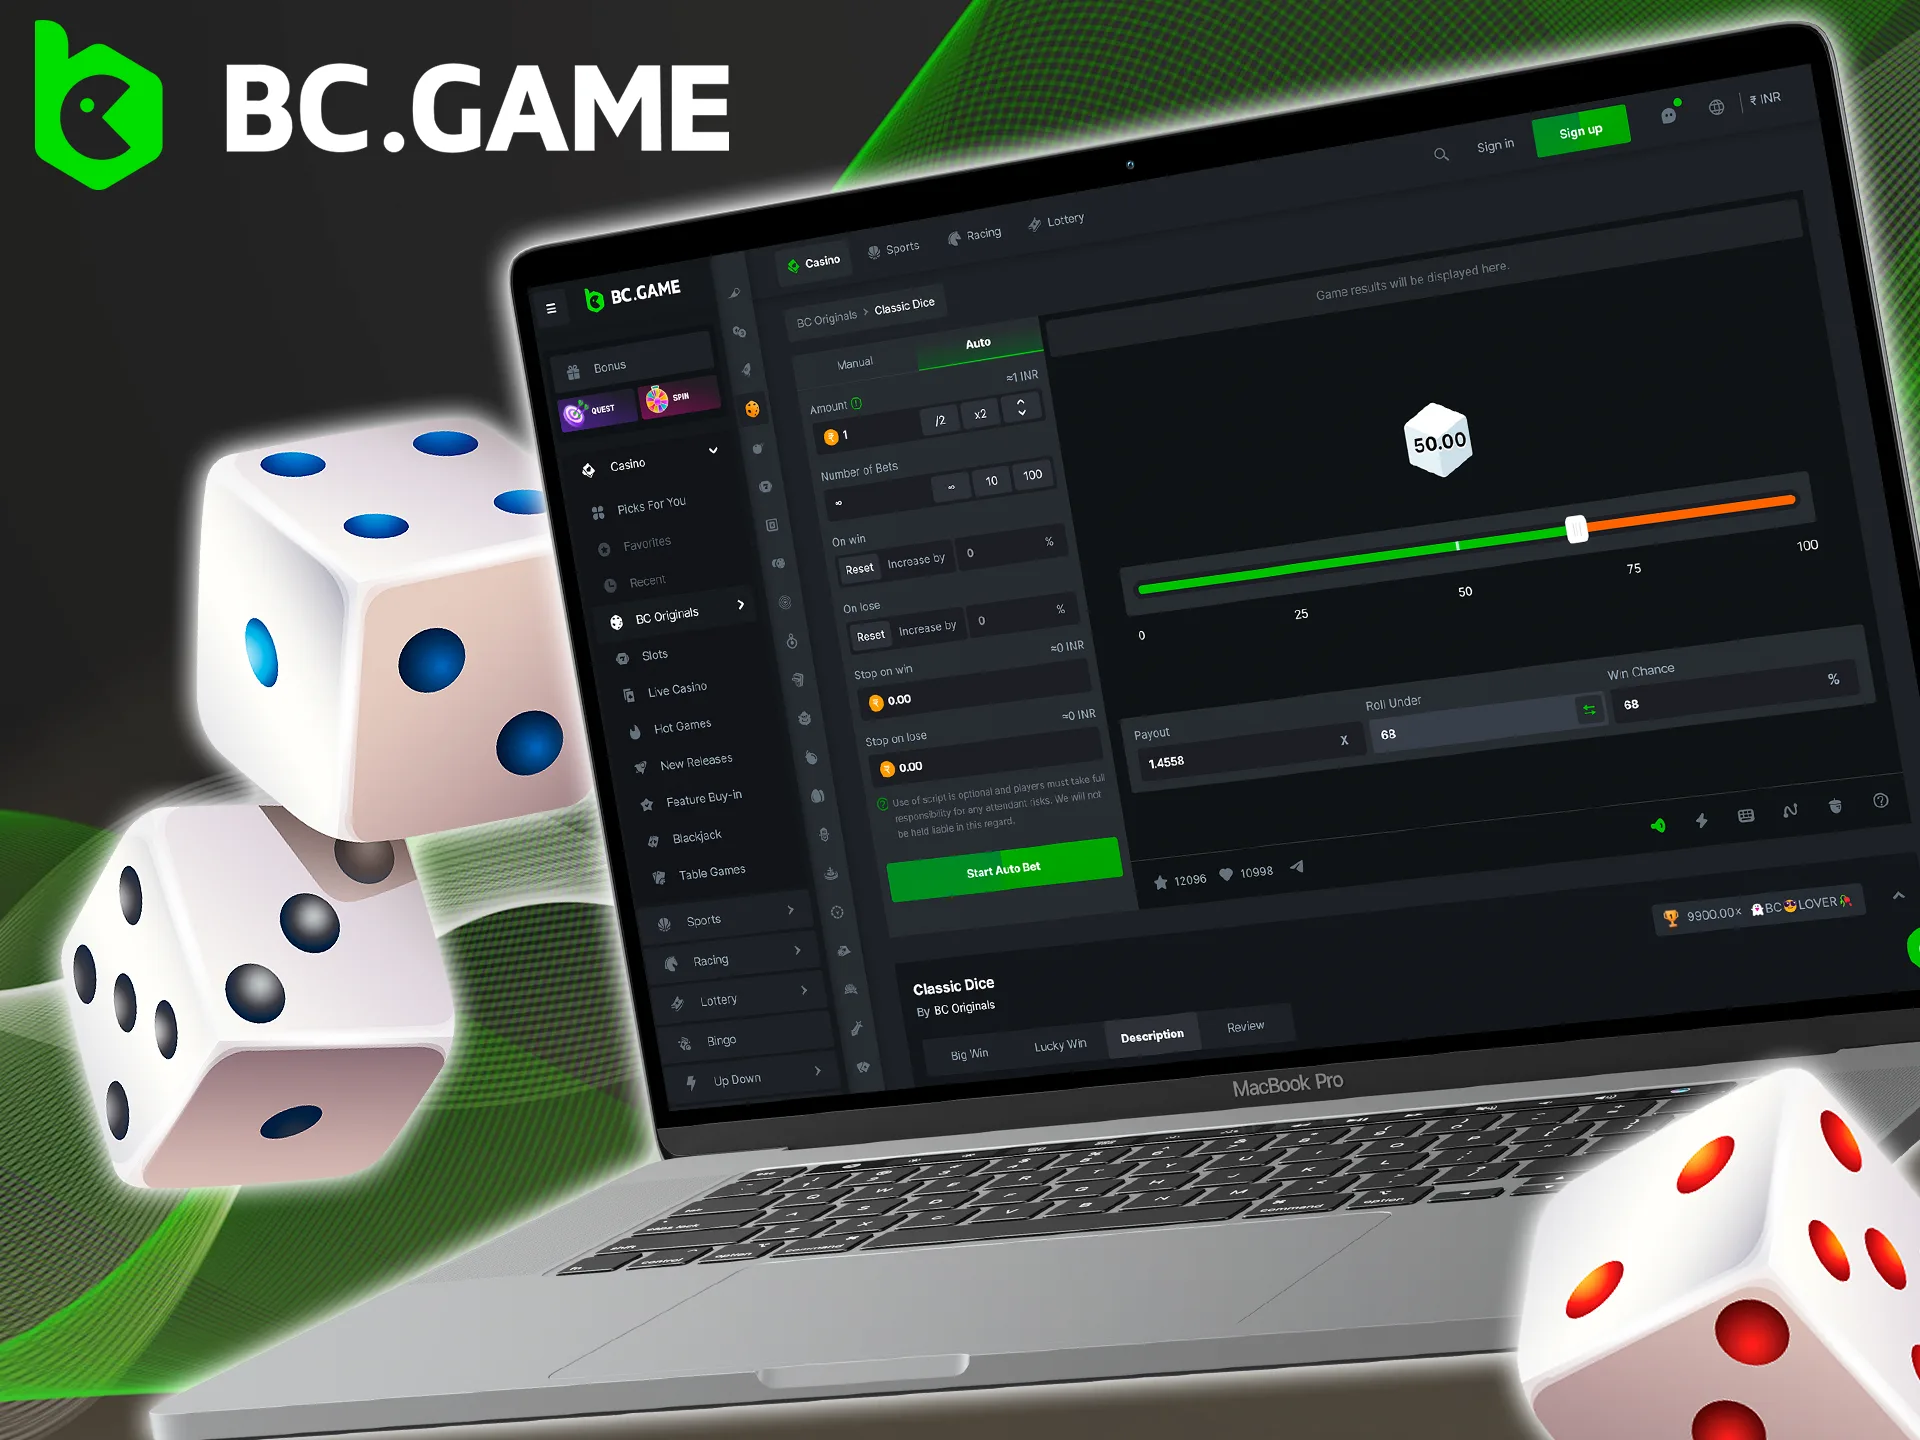 Sign up for BC Game and become part of the world of Classic Dice.